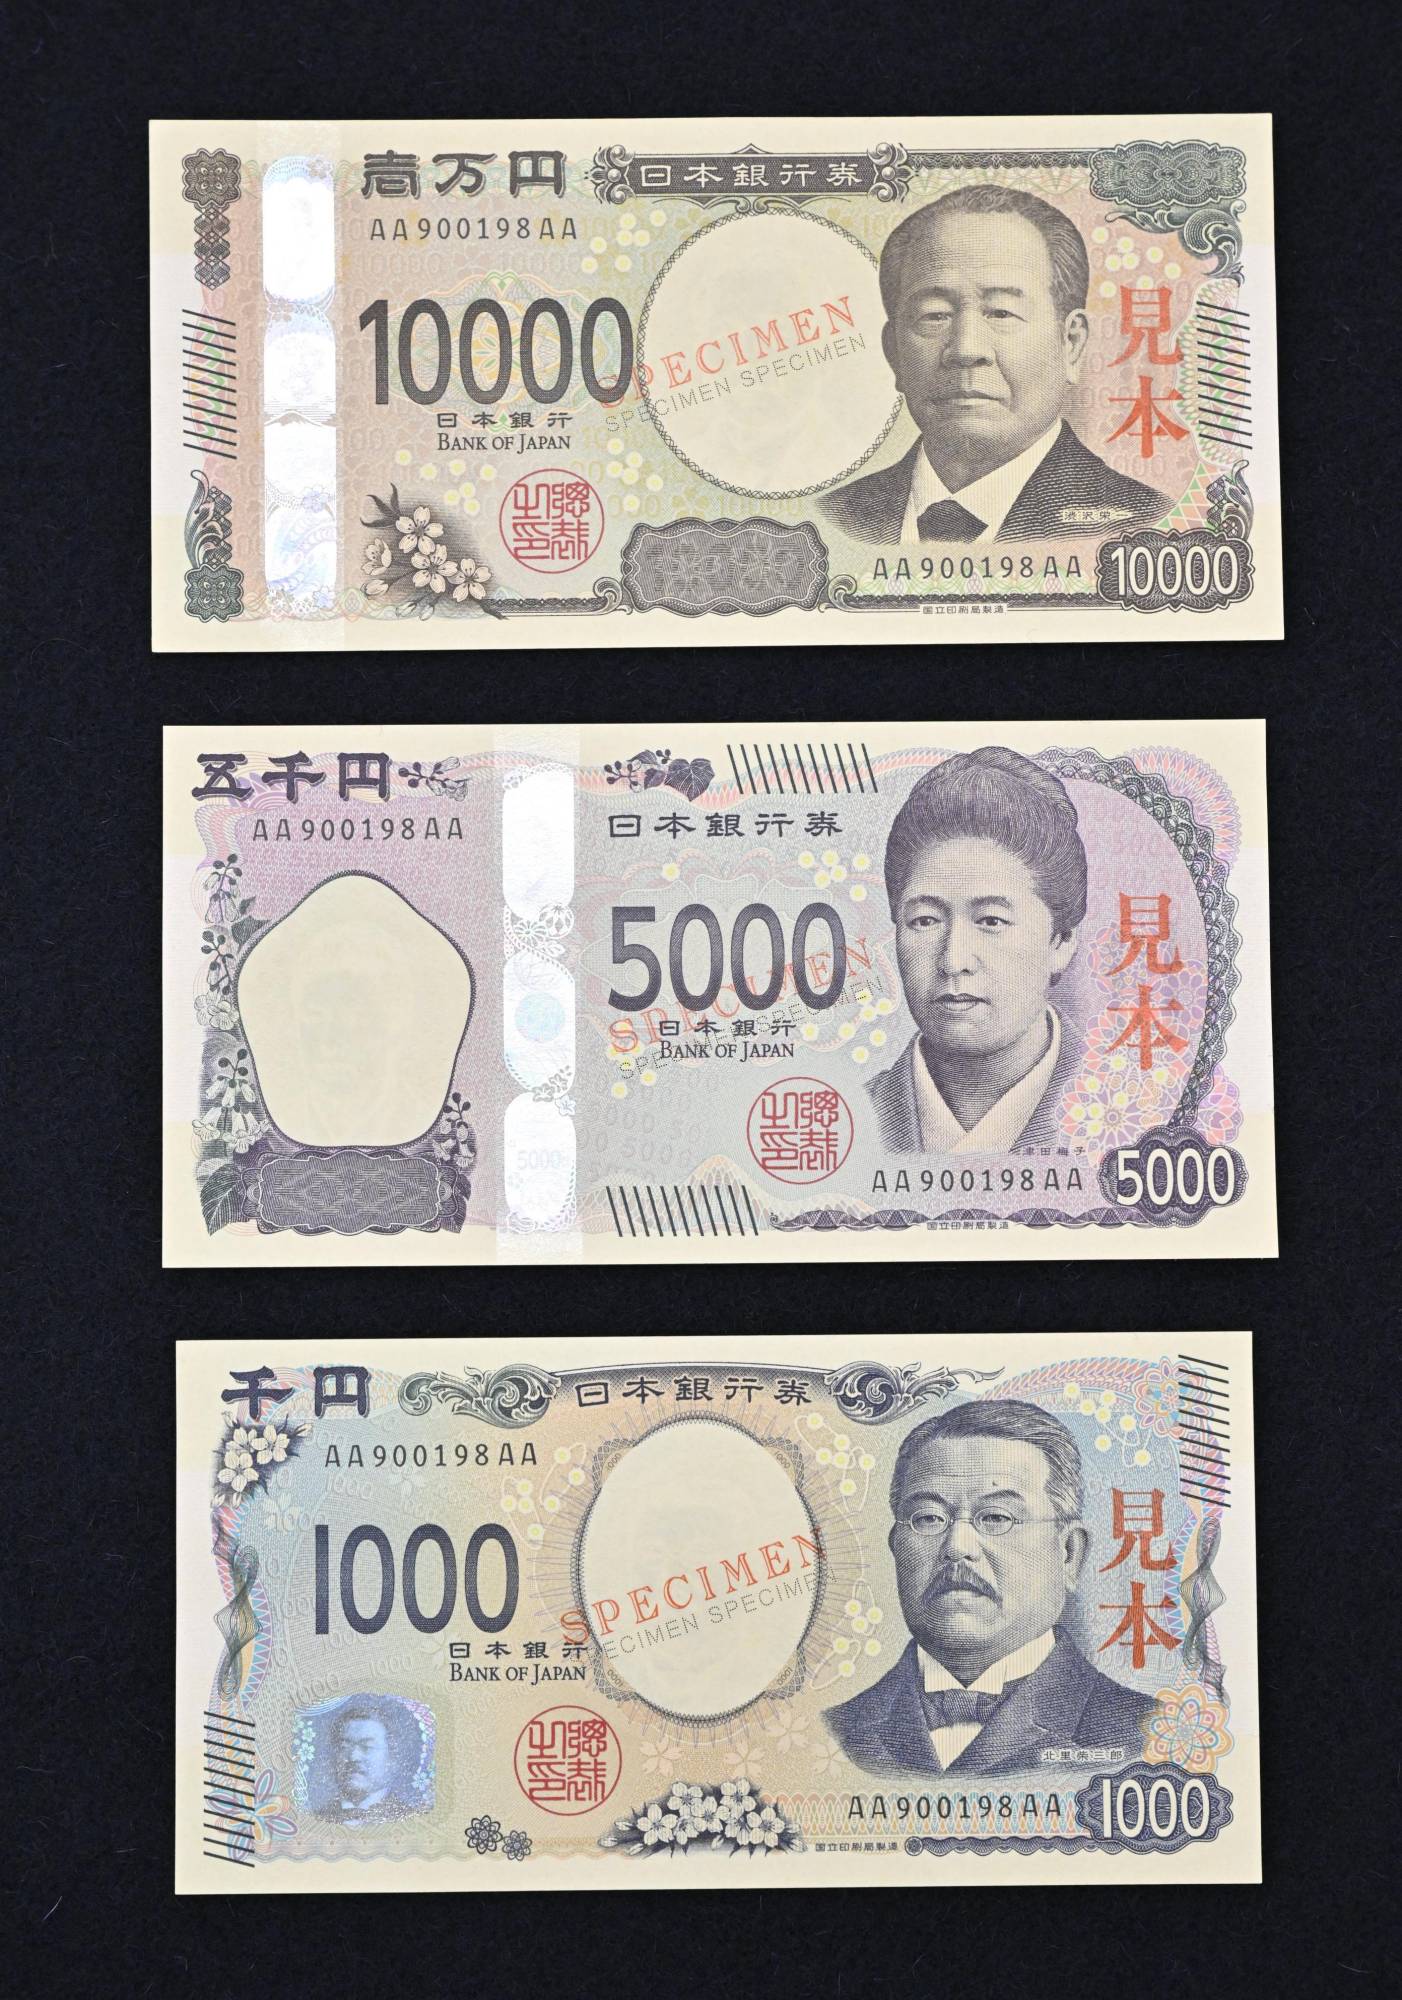 Japan to issue new banknotes in July 2024, marking first renewal in 20